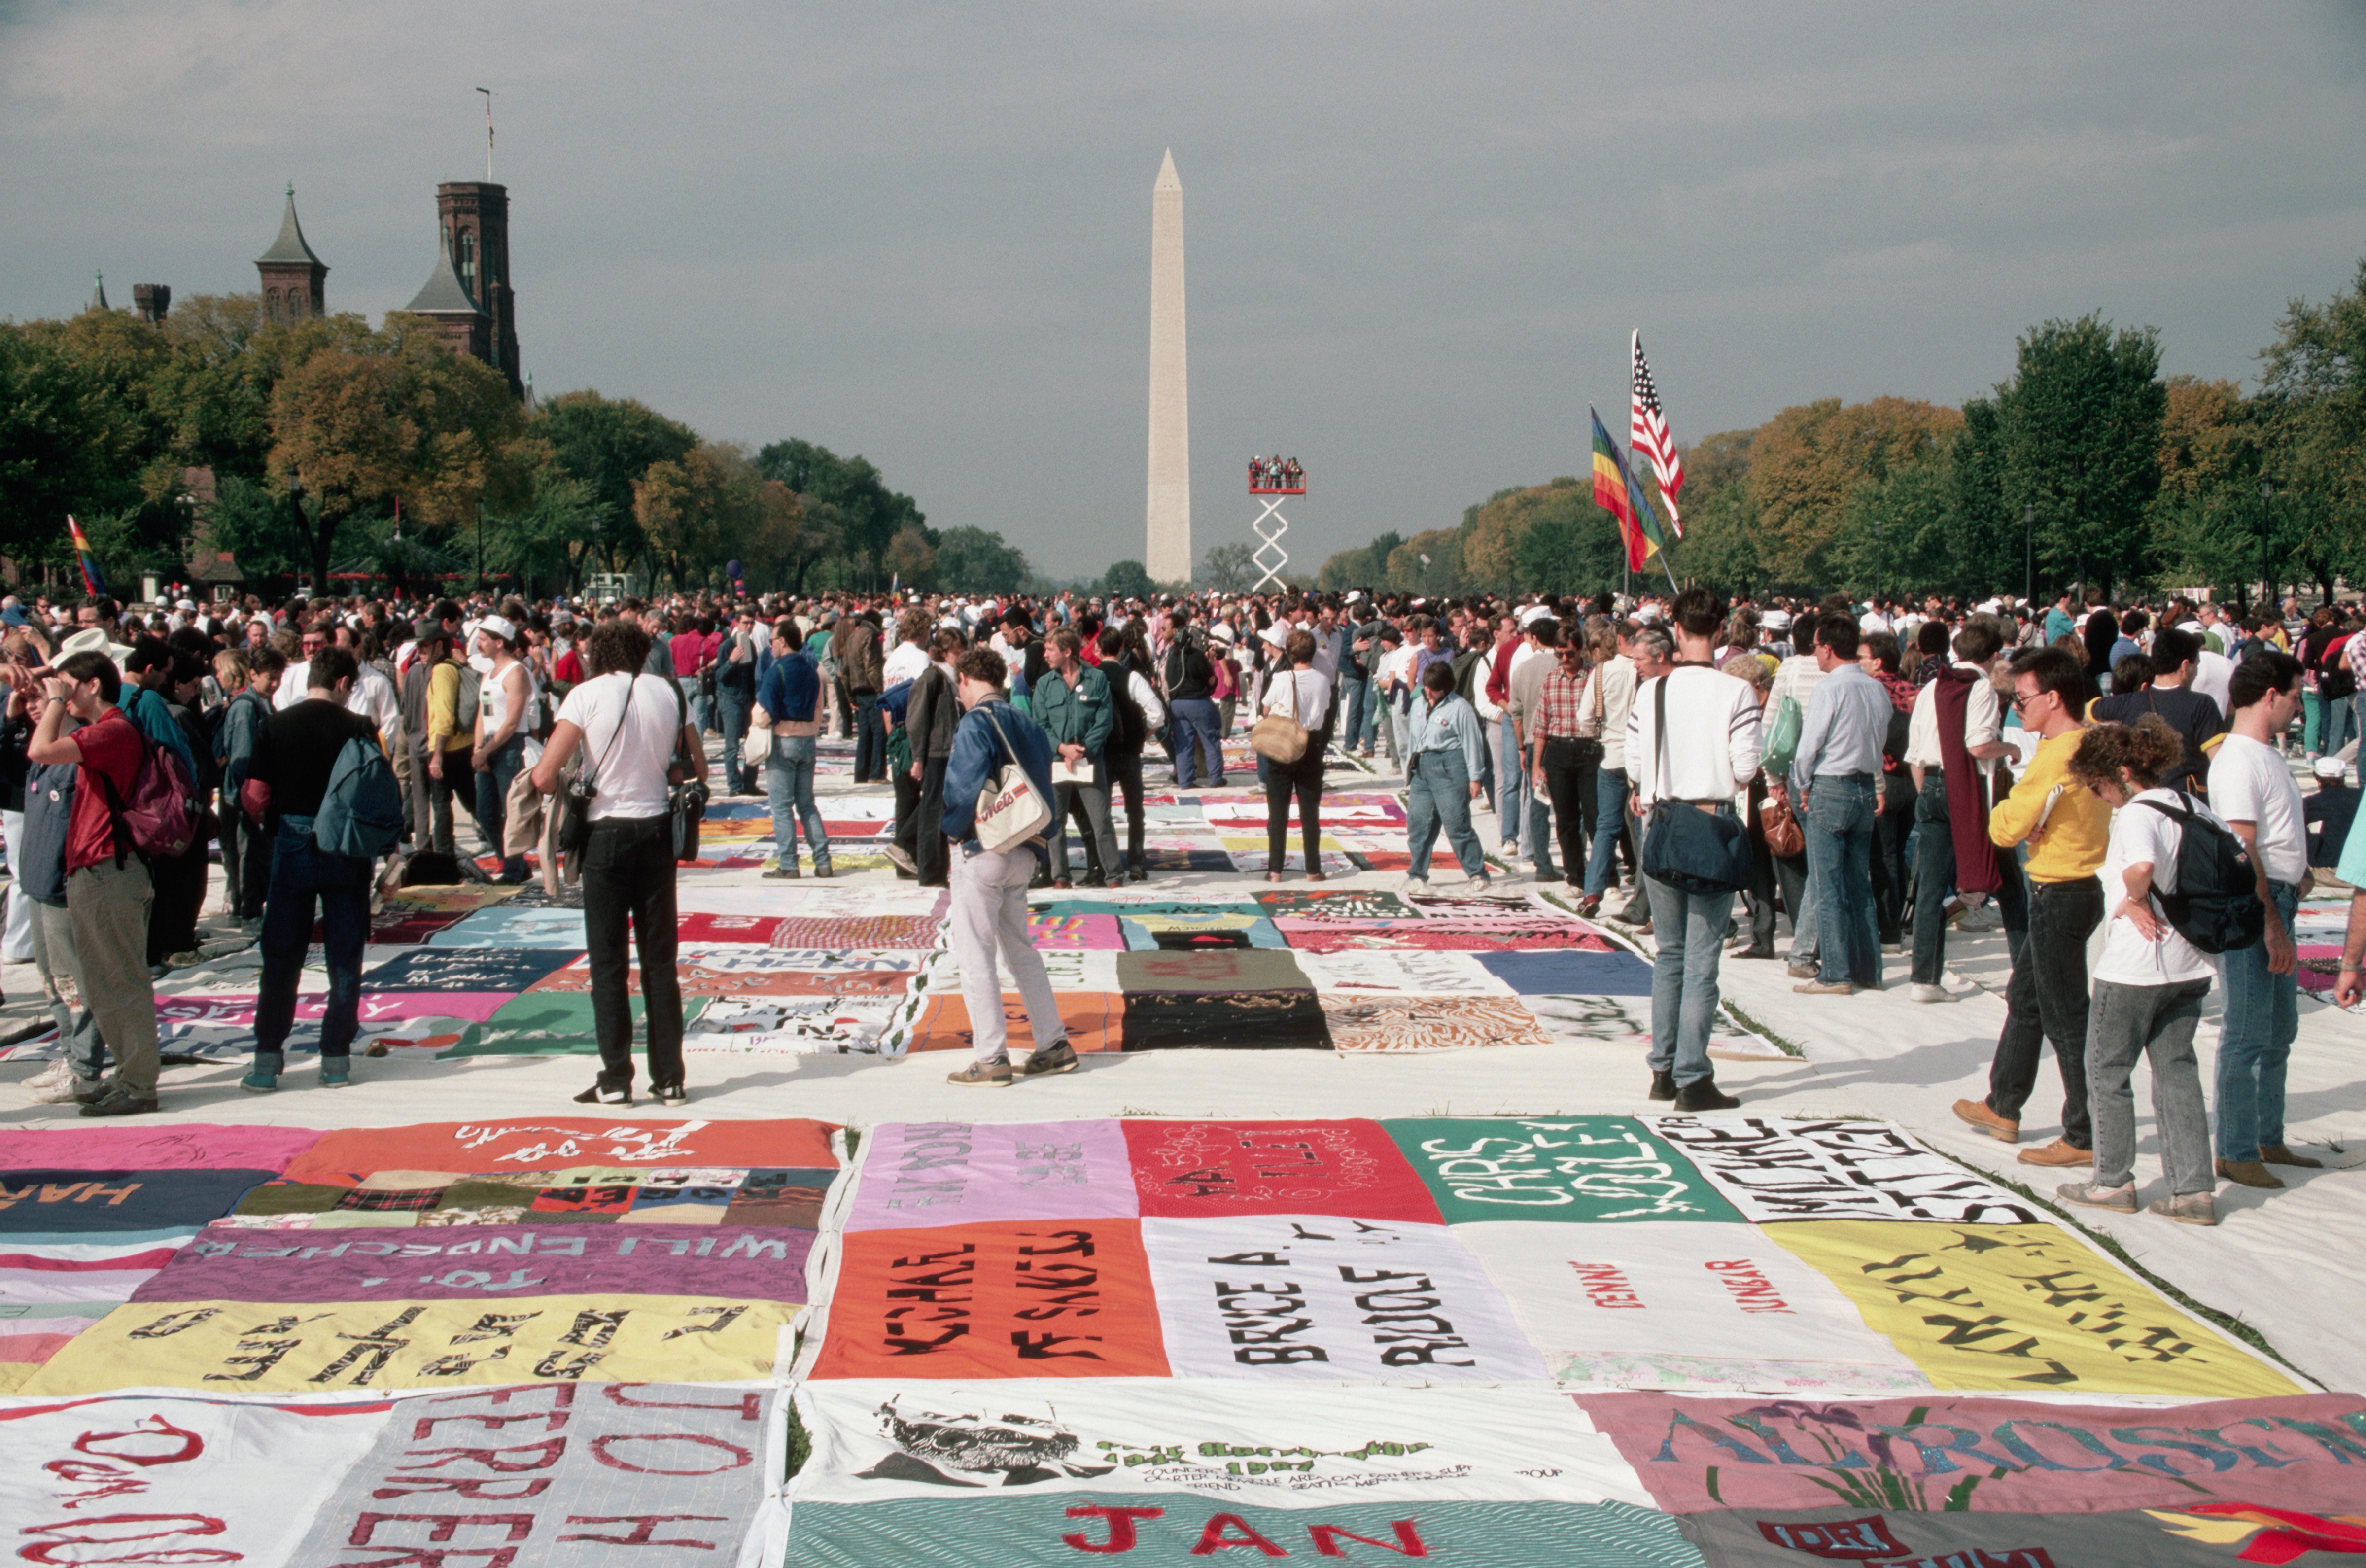 People Looking at the AIDS Quilt